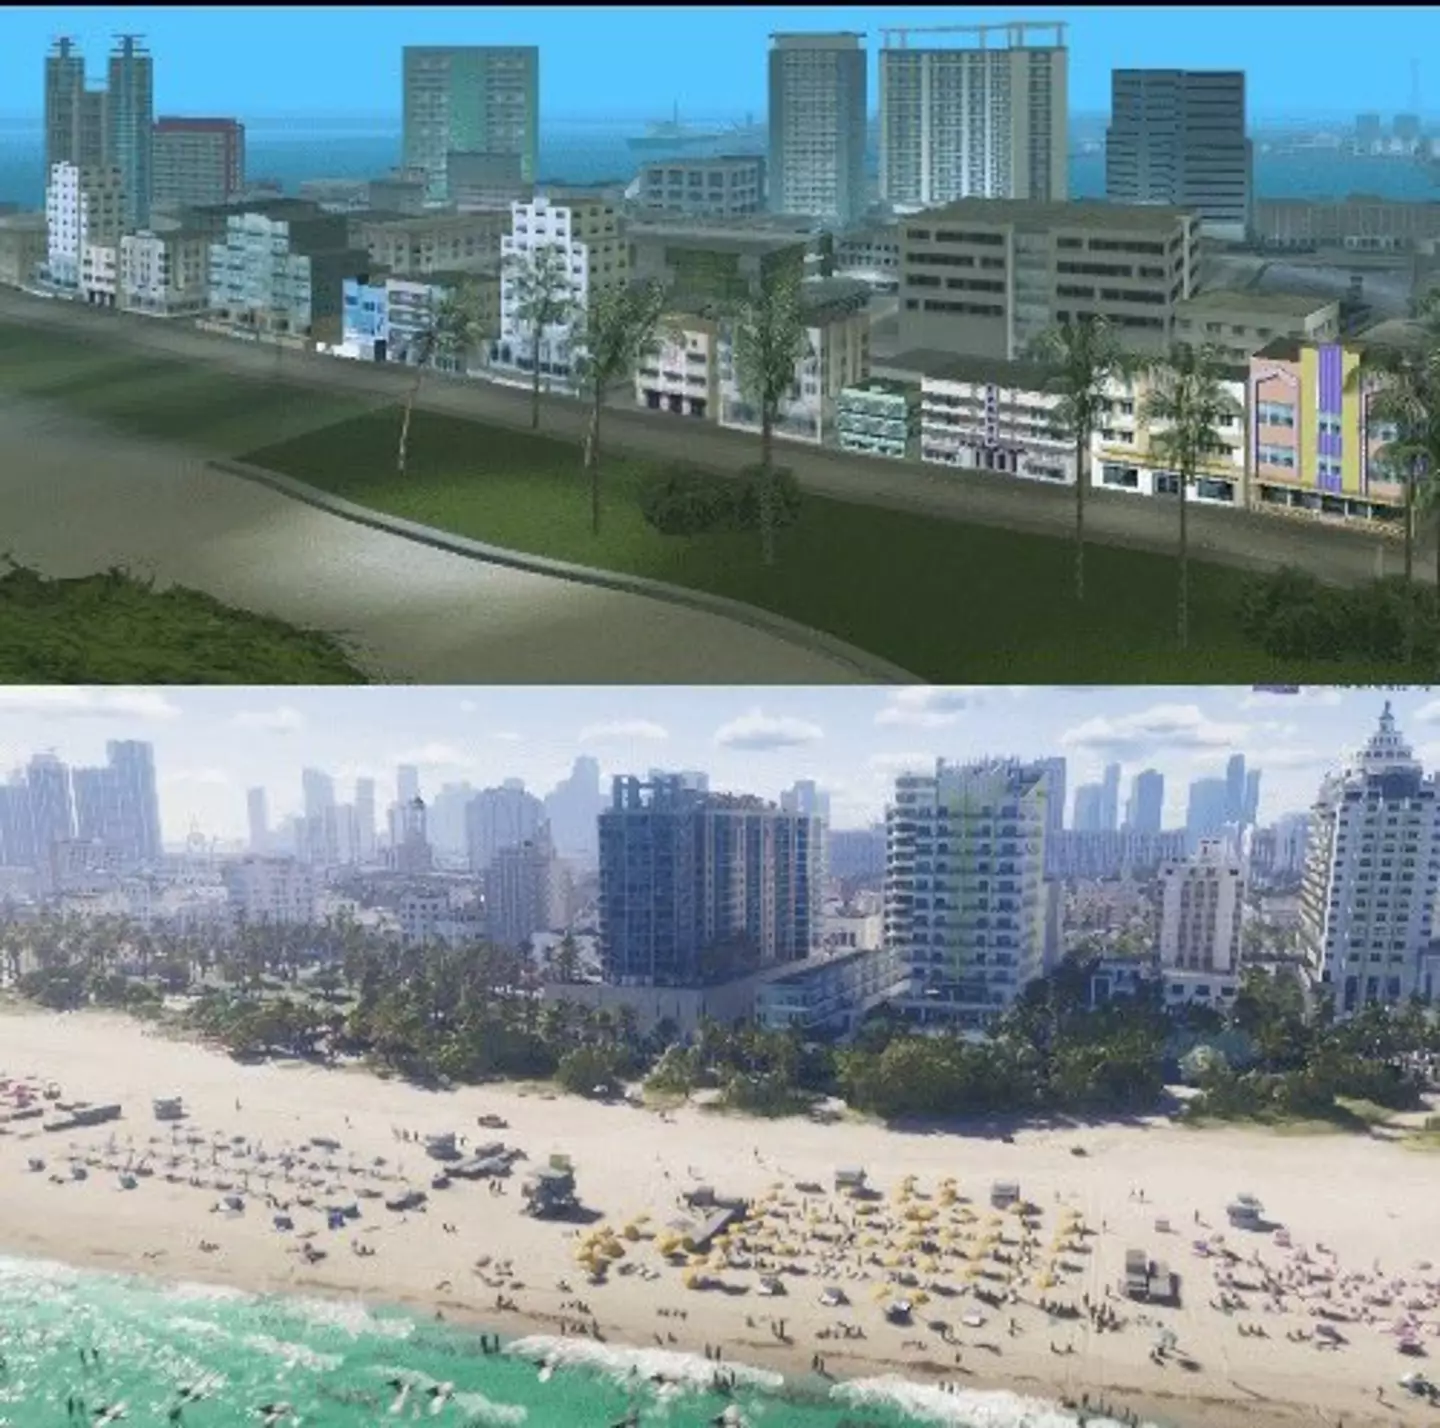 GTA fans are getting nostalgic over comparison pictures of Vice City and GTAVI.